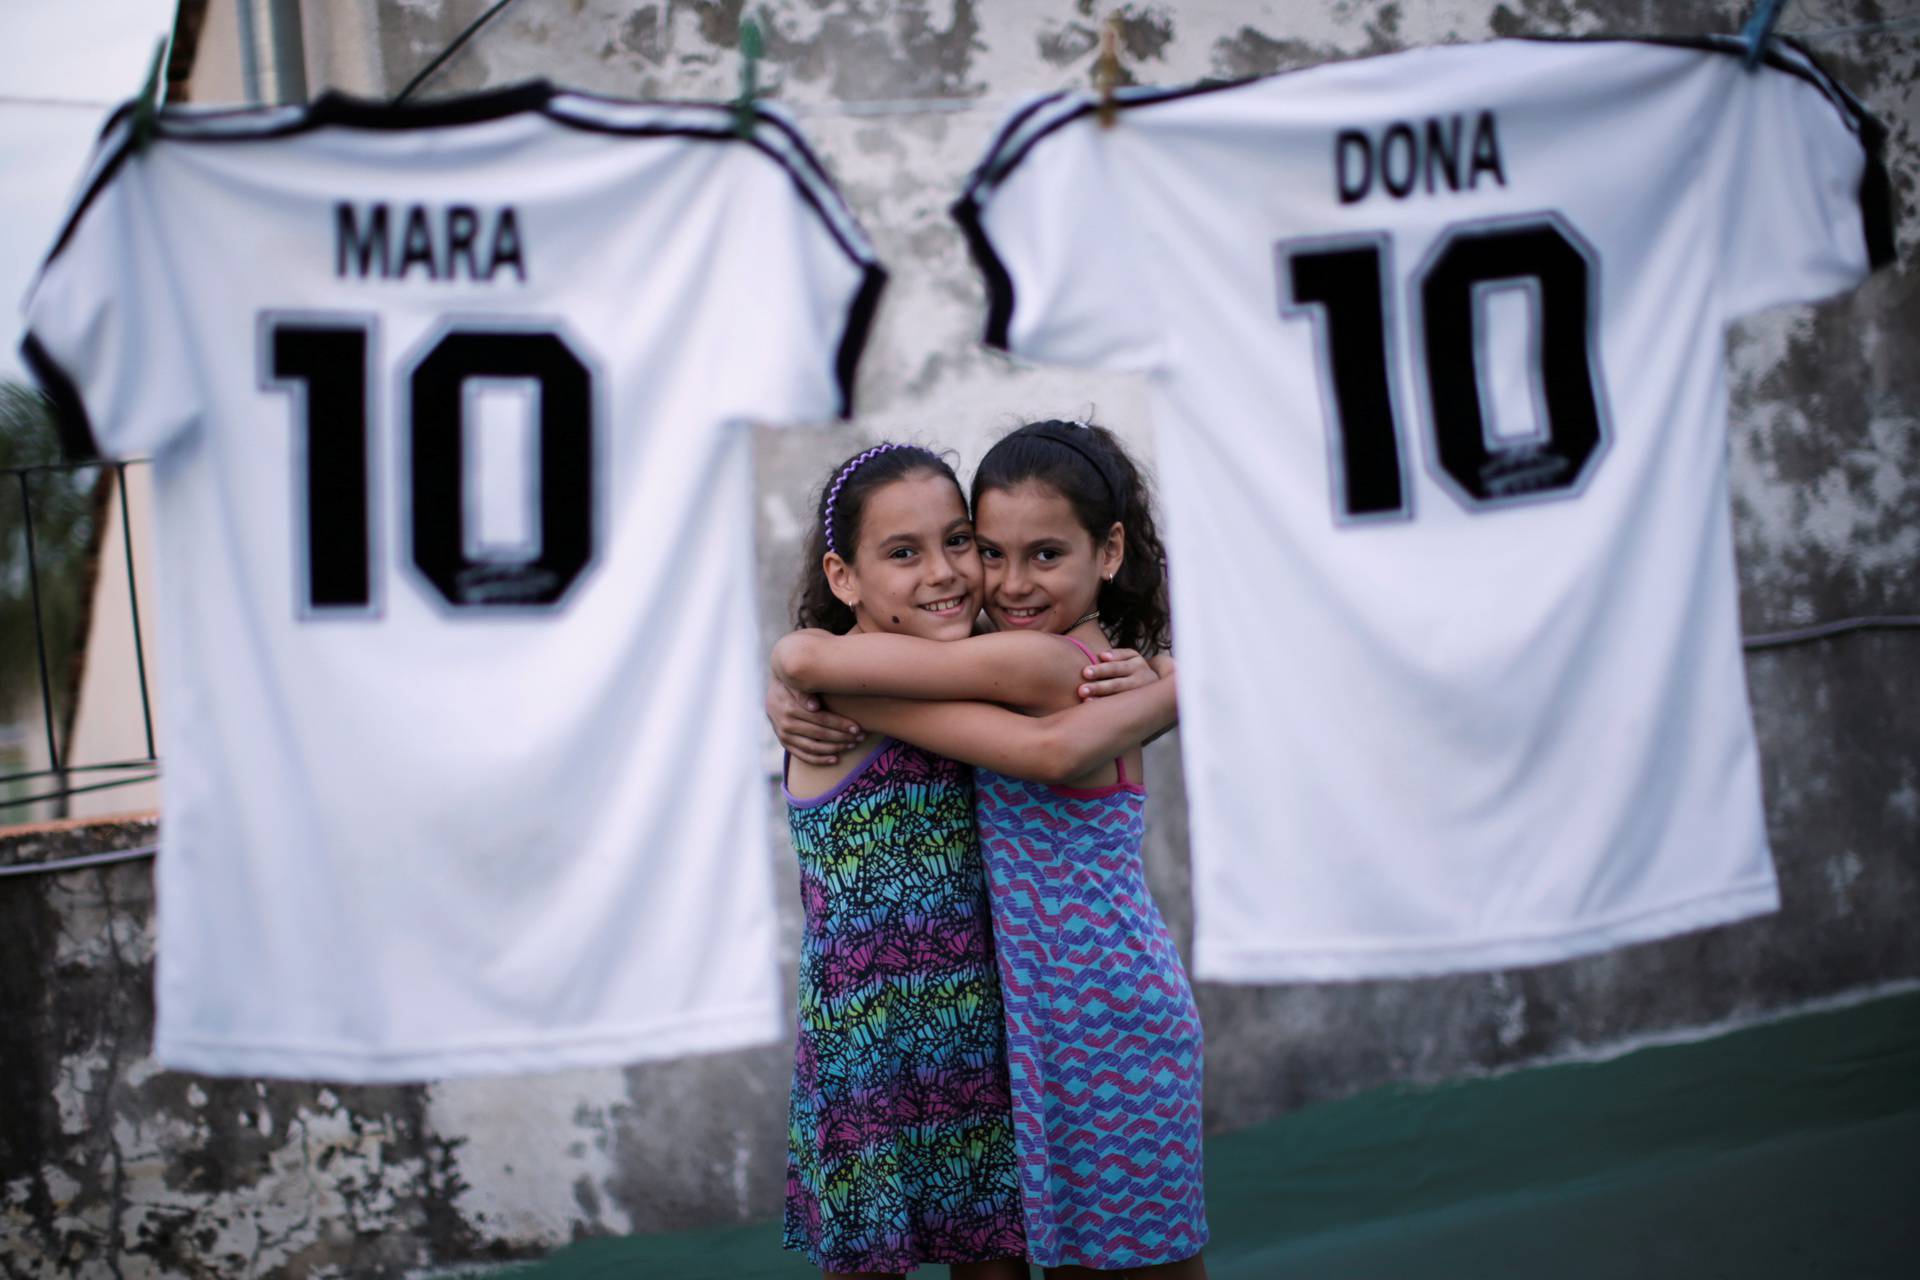 Mara and Dona, twin daughters of Walter Gaston Rotundo,a devoted Diego Maradona fan who named his daughters after the soccer star, pose near t-shirts with their names, in Buenos Aires